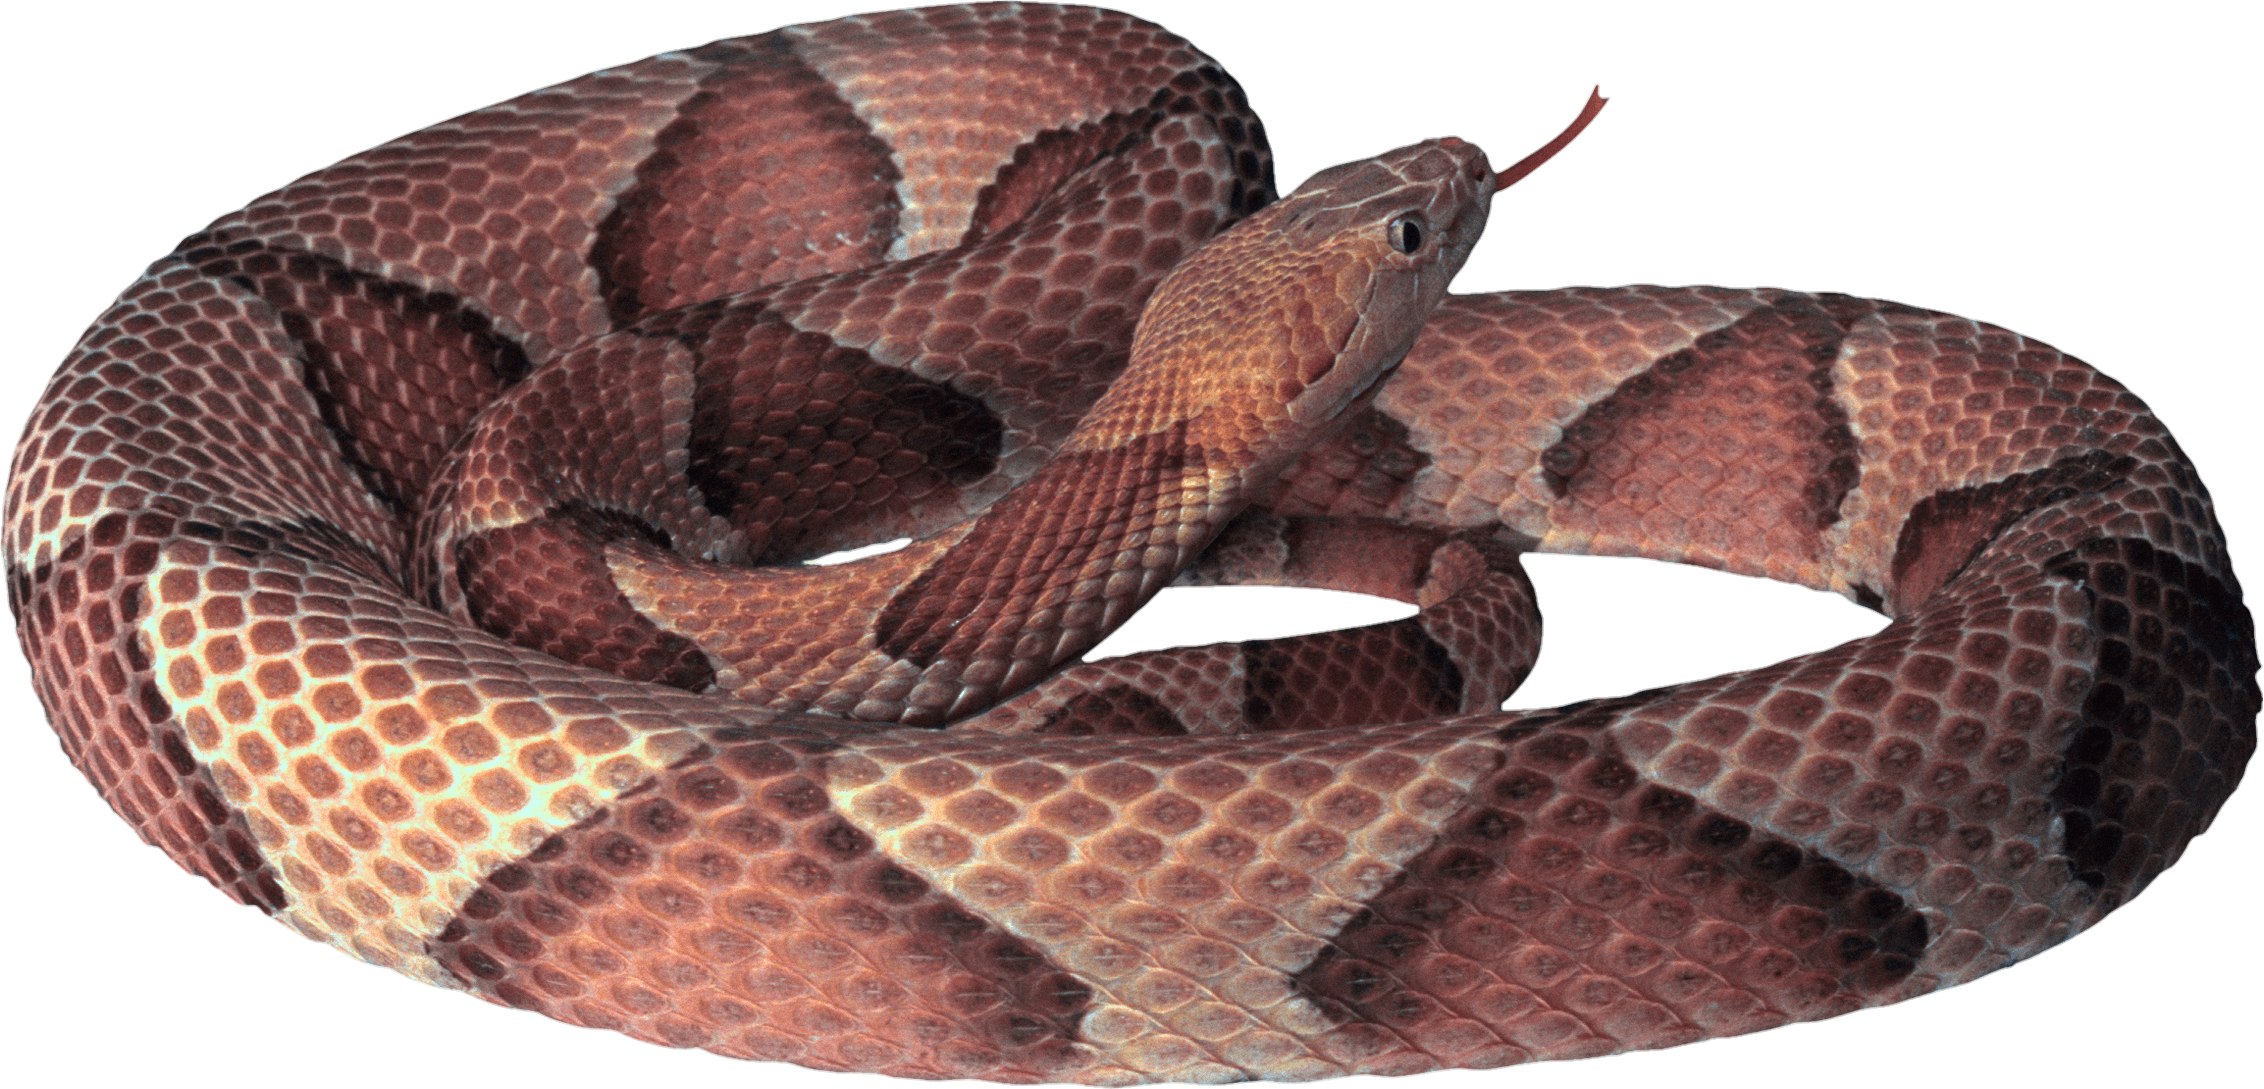 snake-png-image-pngfre-16